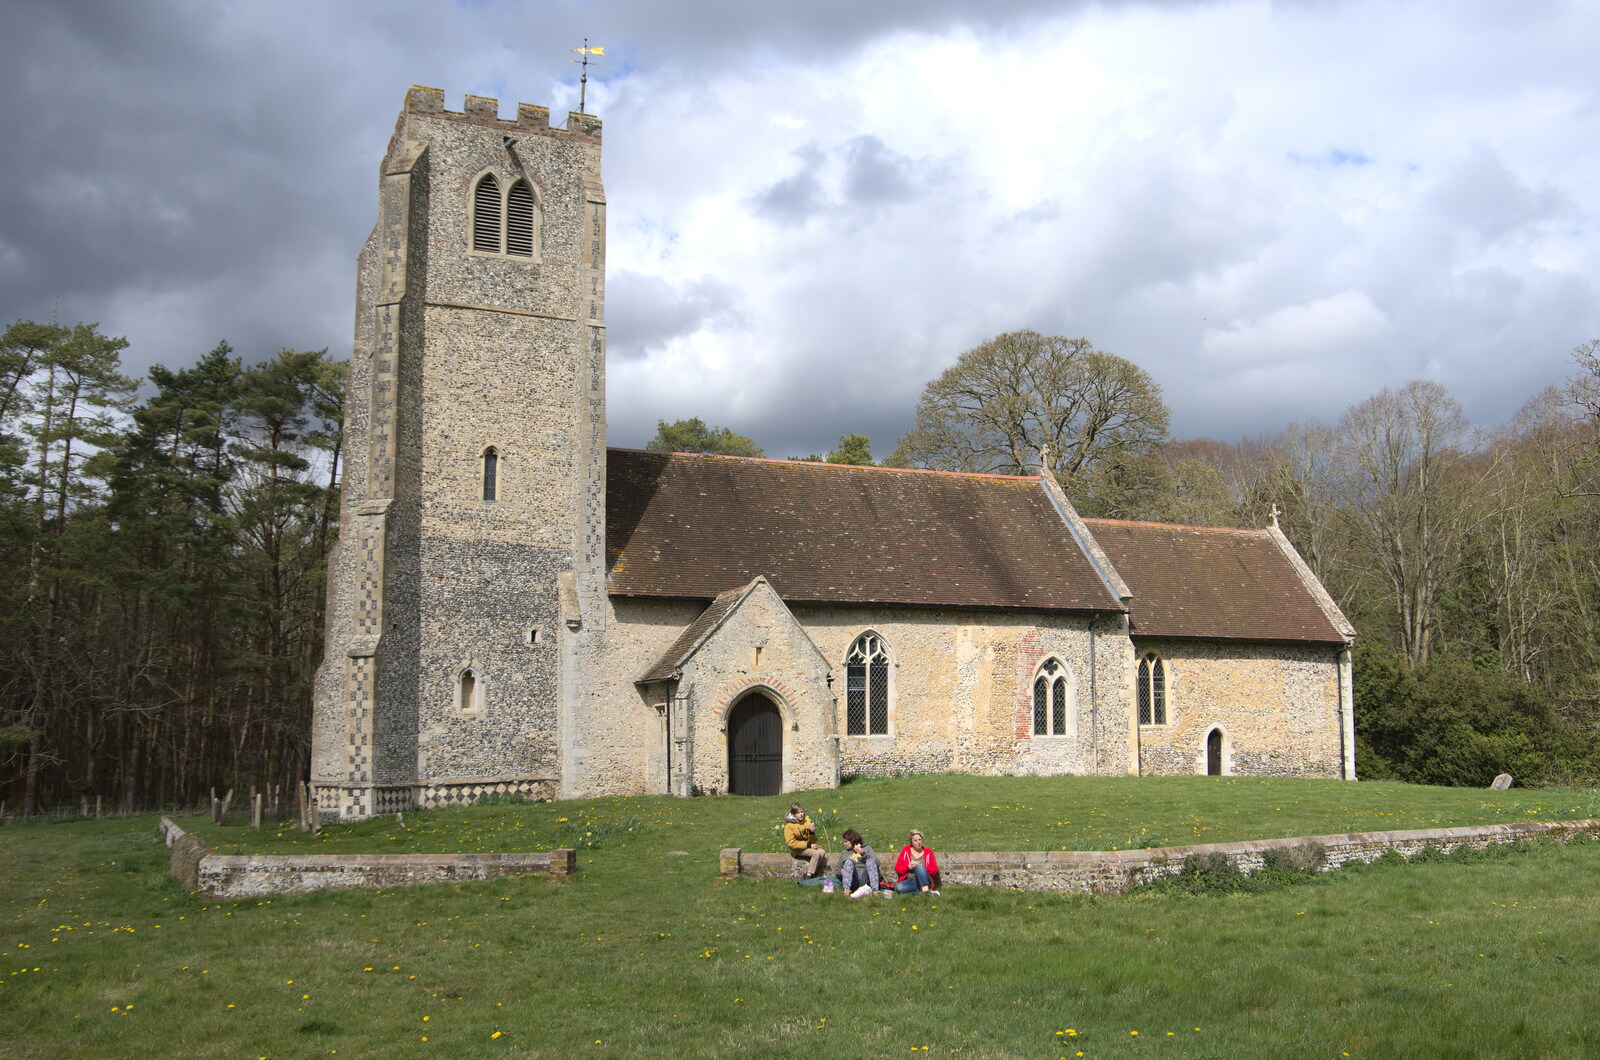 A Camper-Van Trip, West Harling, Norfolk - 13th April 2022: The lost church of All Saints at West Harling